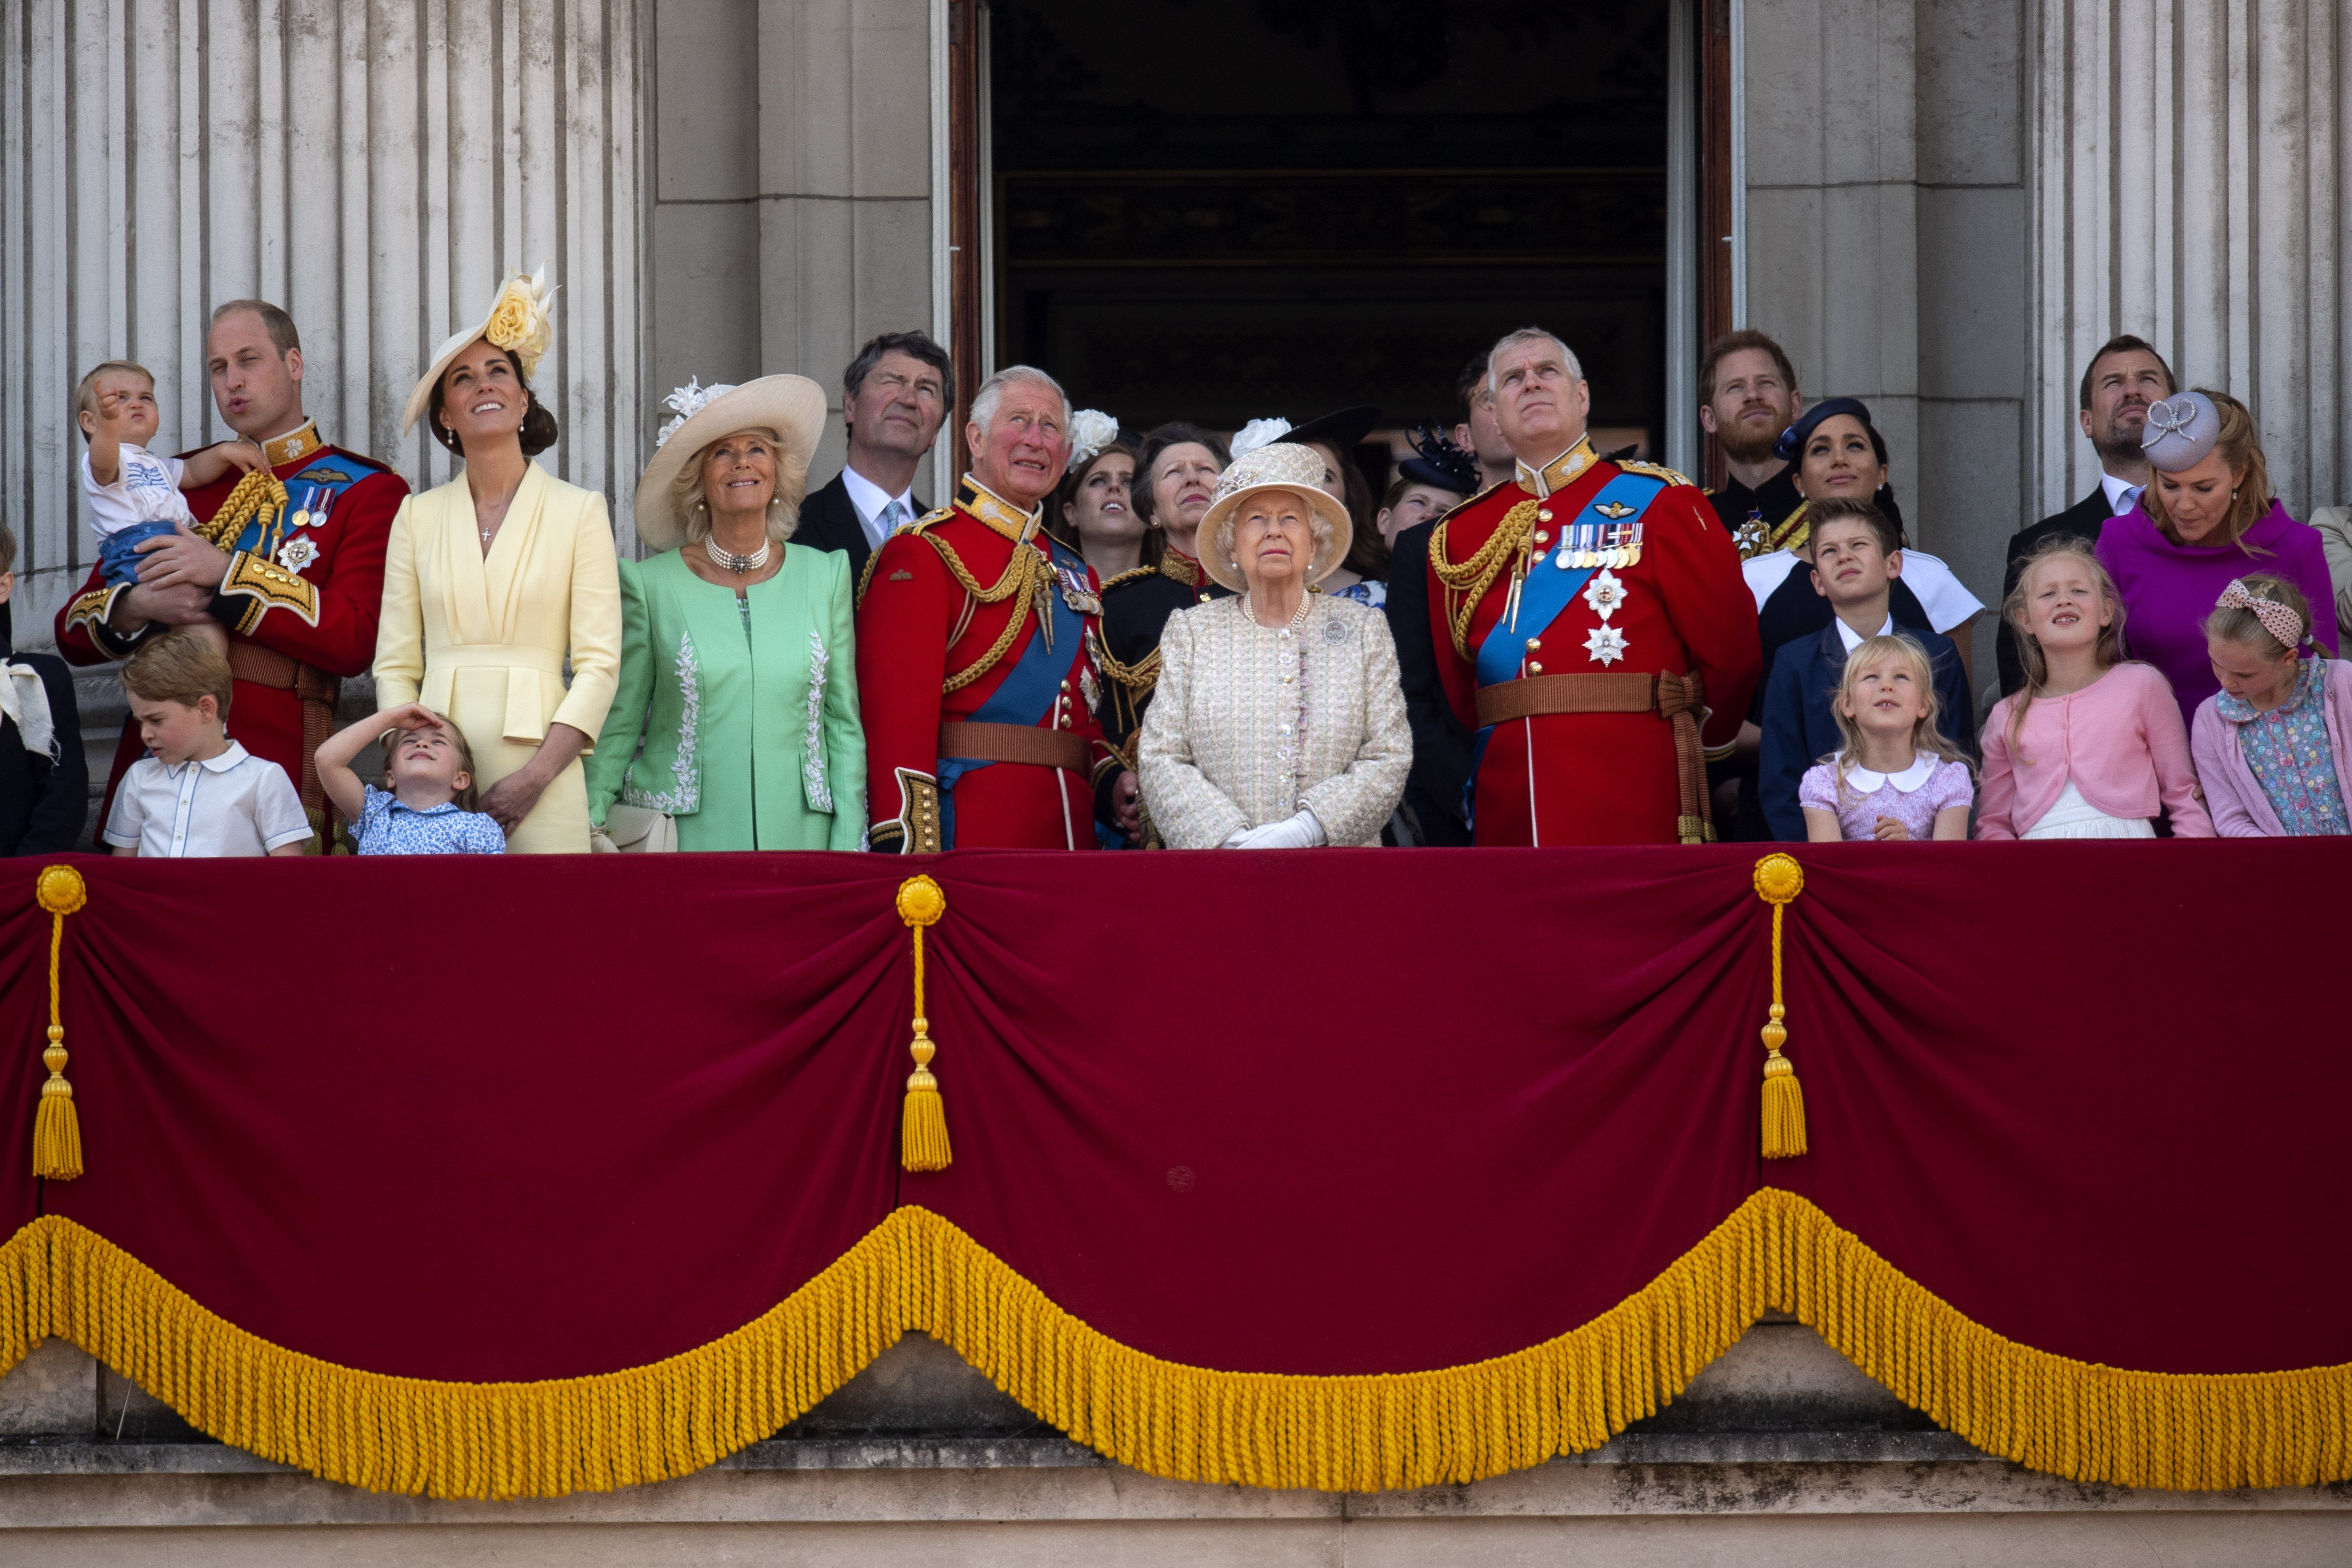 Queen Elizabeth II is joined by members of the royal family, including the Duke and Duchess of Cambridge with their children, Prince Louis, Prince George, Princess Charlotte, Duchess of Cornwall, Prince of Wales, Princess Royal, Duke of York, Duke and Duchess of Sussex, Peter and Autumn Phillips and their children Savannah and Isla, on the balcony of Buckingham Place watch the flypast after the Trooping the Colour ceremony, as she celebrates her official birthday. | Source: Getty Images